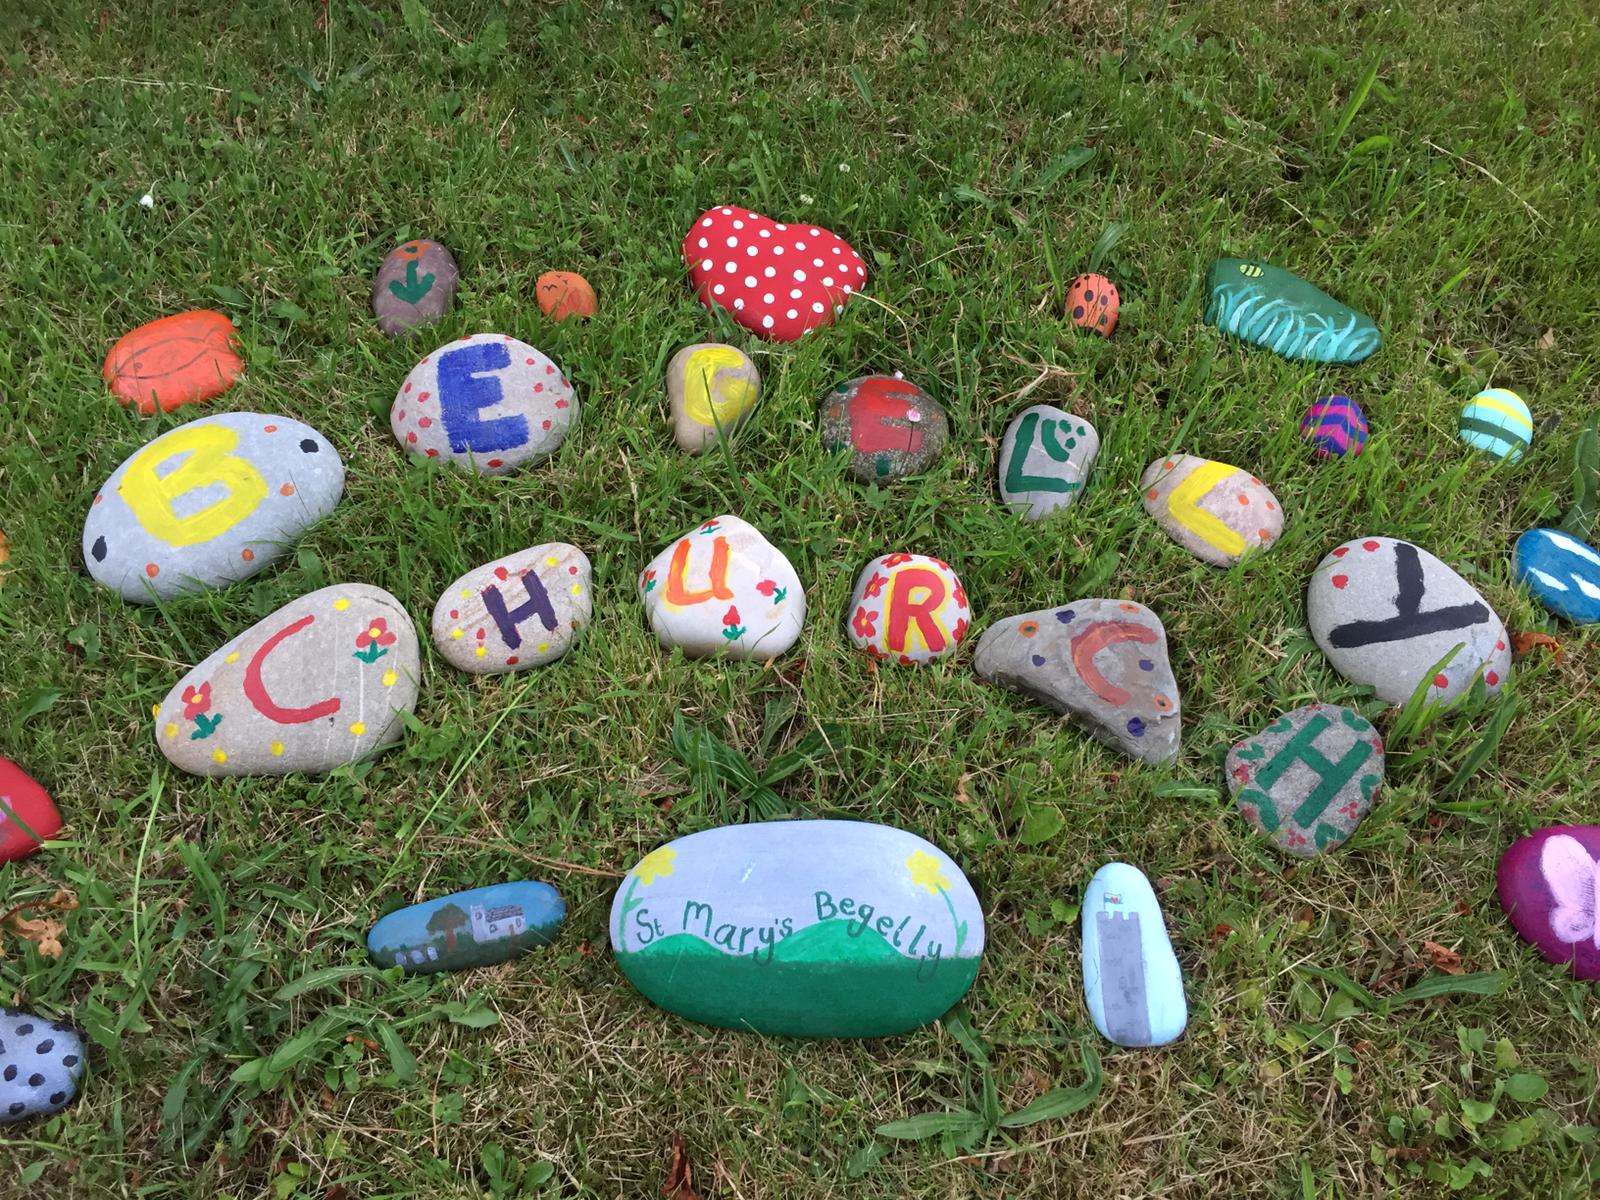 Colourful painted stones